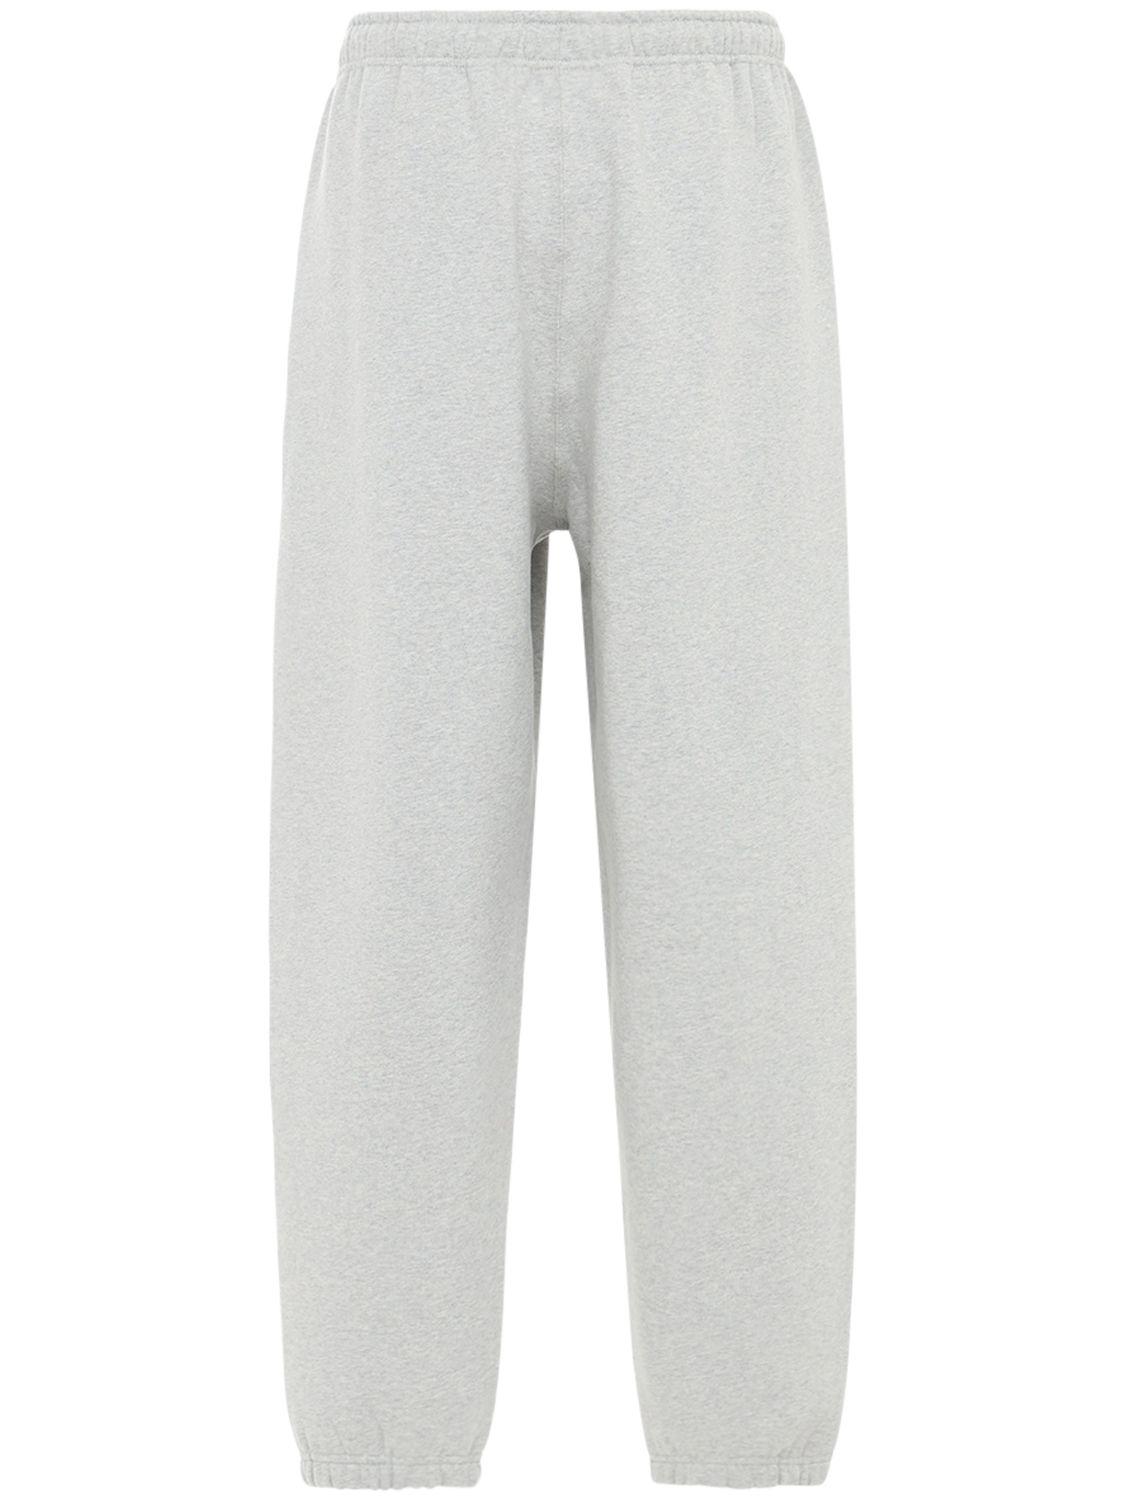 Nike Lab Sweatpants in Heather Grey (Gray) for Men - Lyst